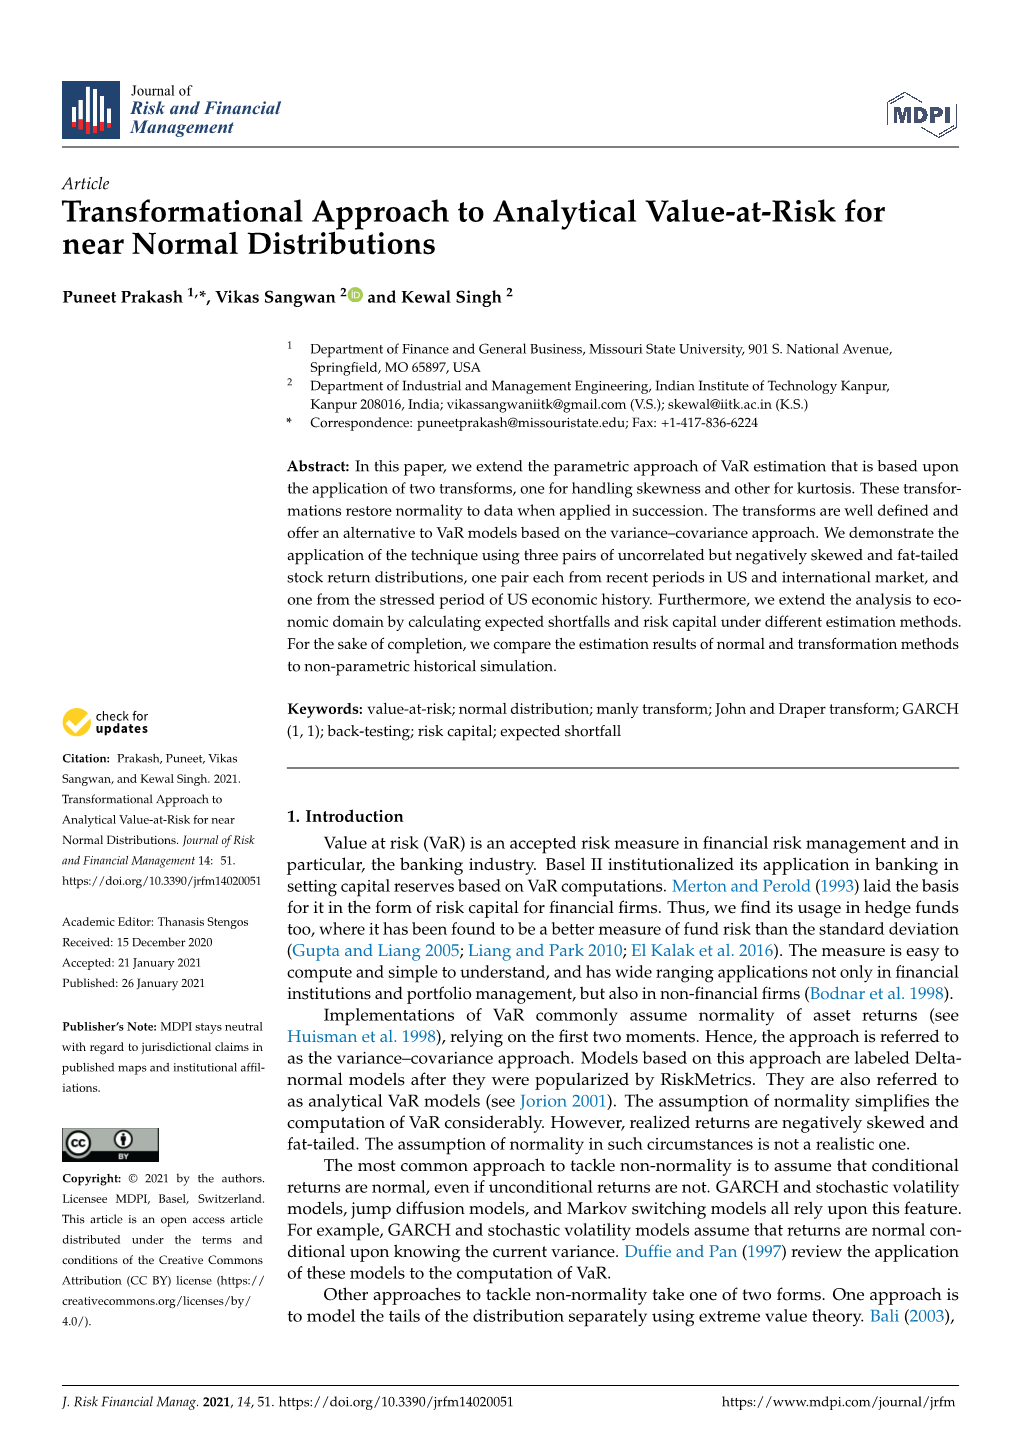 Transformational Approach to Analytical Value-At-Risk for Near Normal Distributions